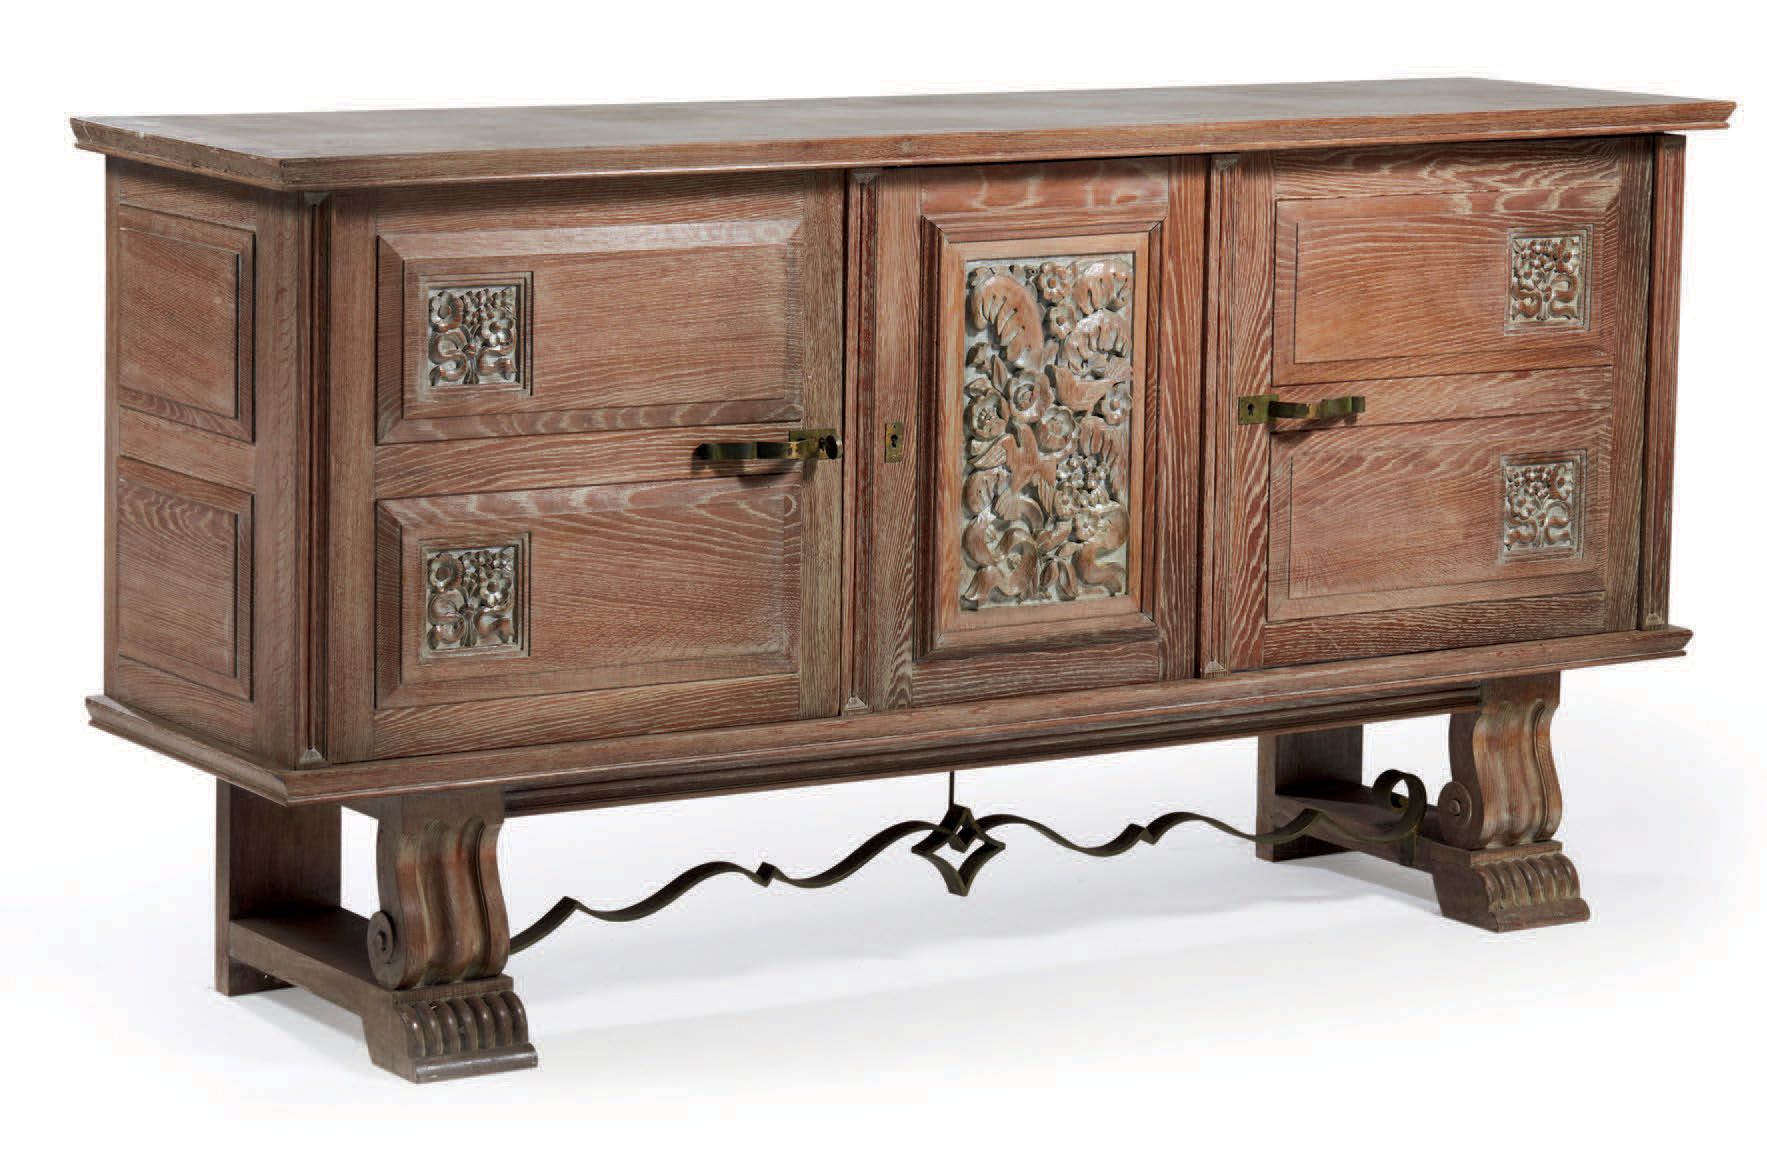 Travail français 1950 
Ceruse oak sideboard with carved floral motifs opening wi&hellip;